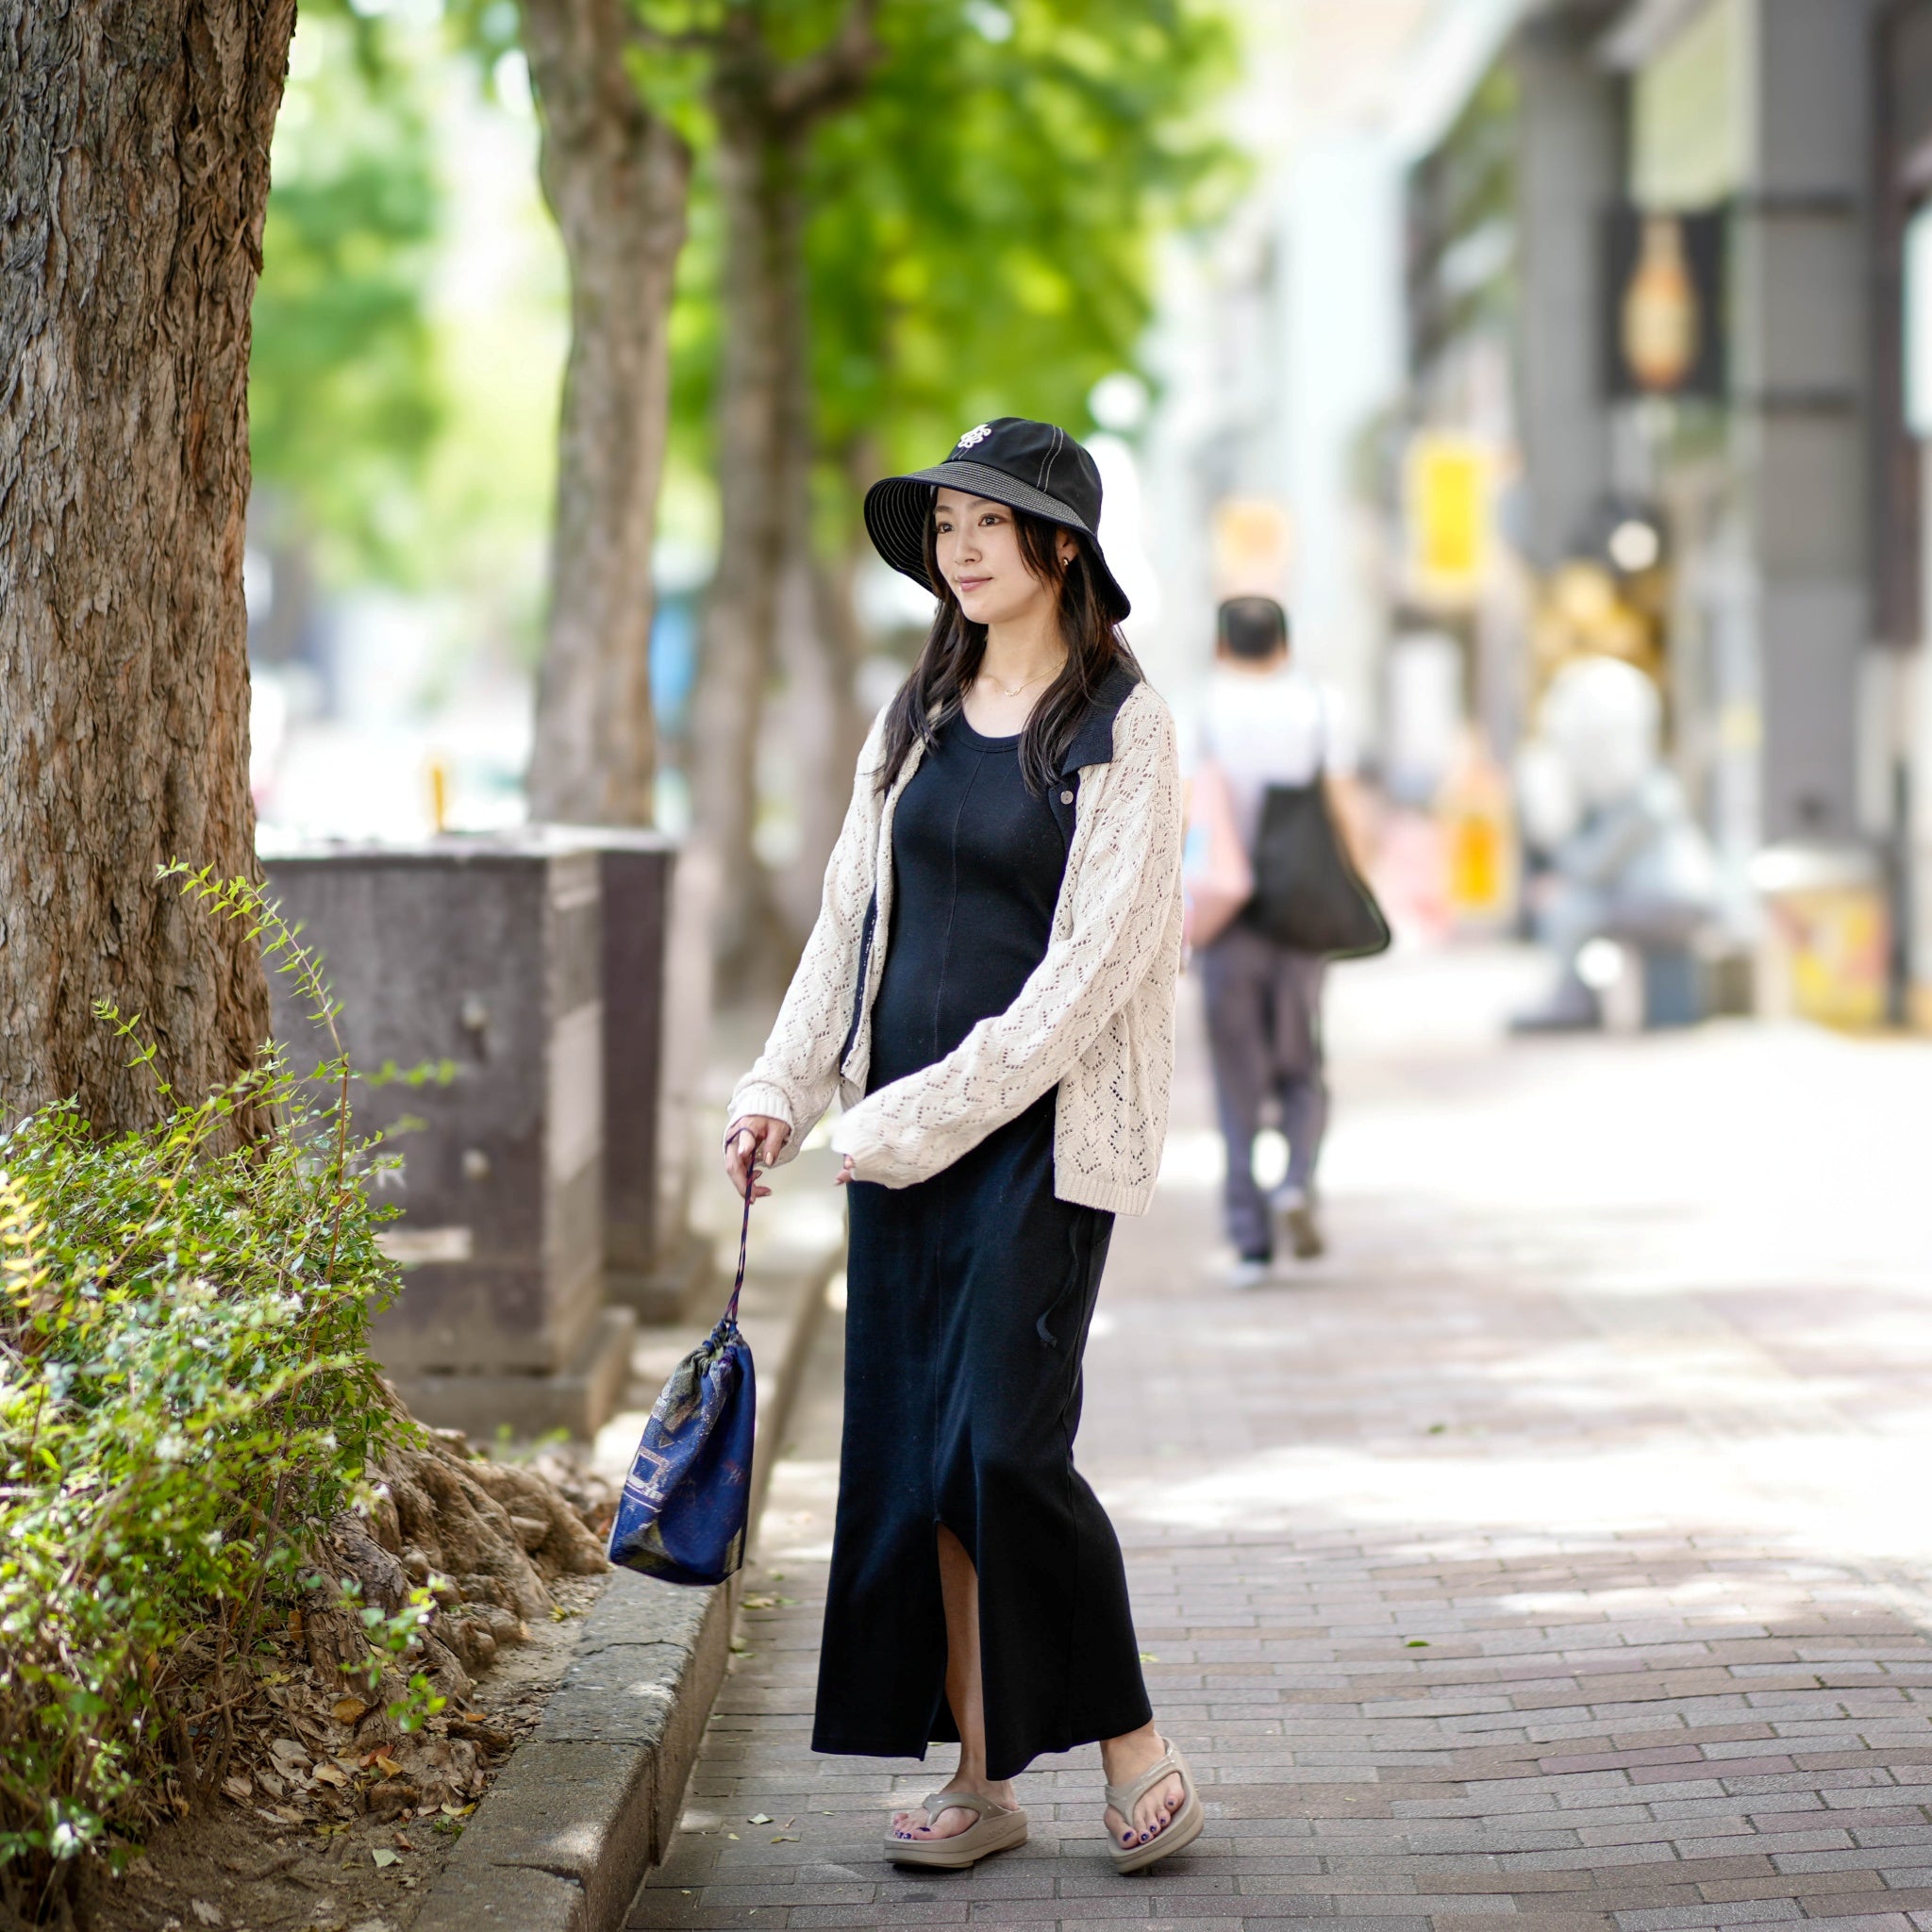 No:WHT24HKN4020 | Name:OPENWORK KNIT CARDIGAN | Color:LINEN【WHYTO_ホワイト】